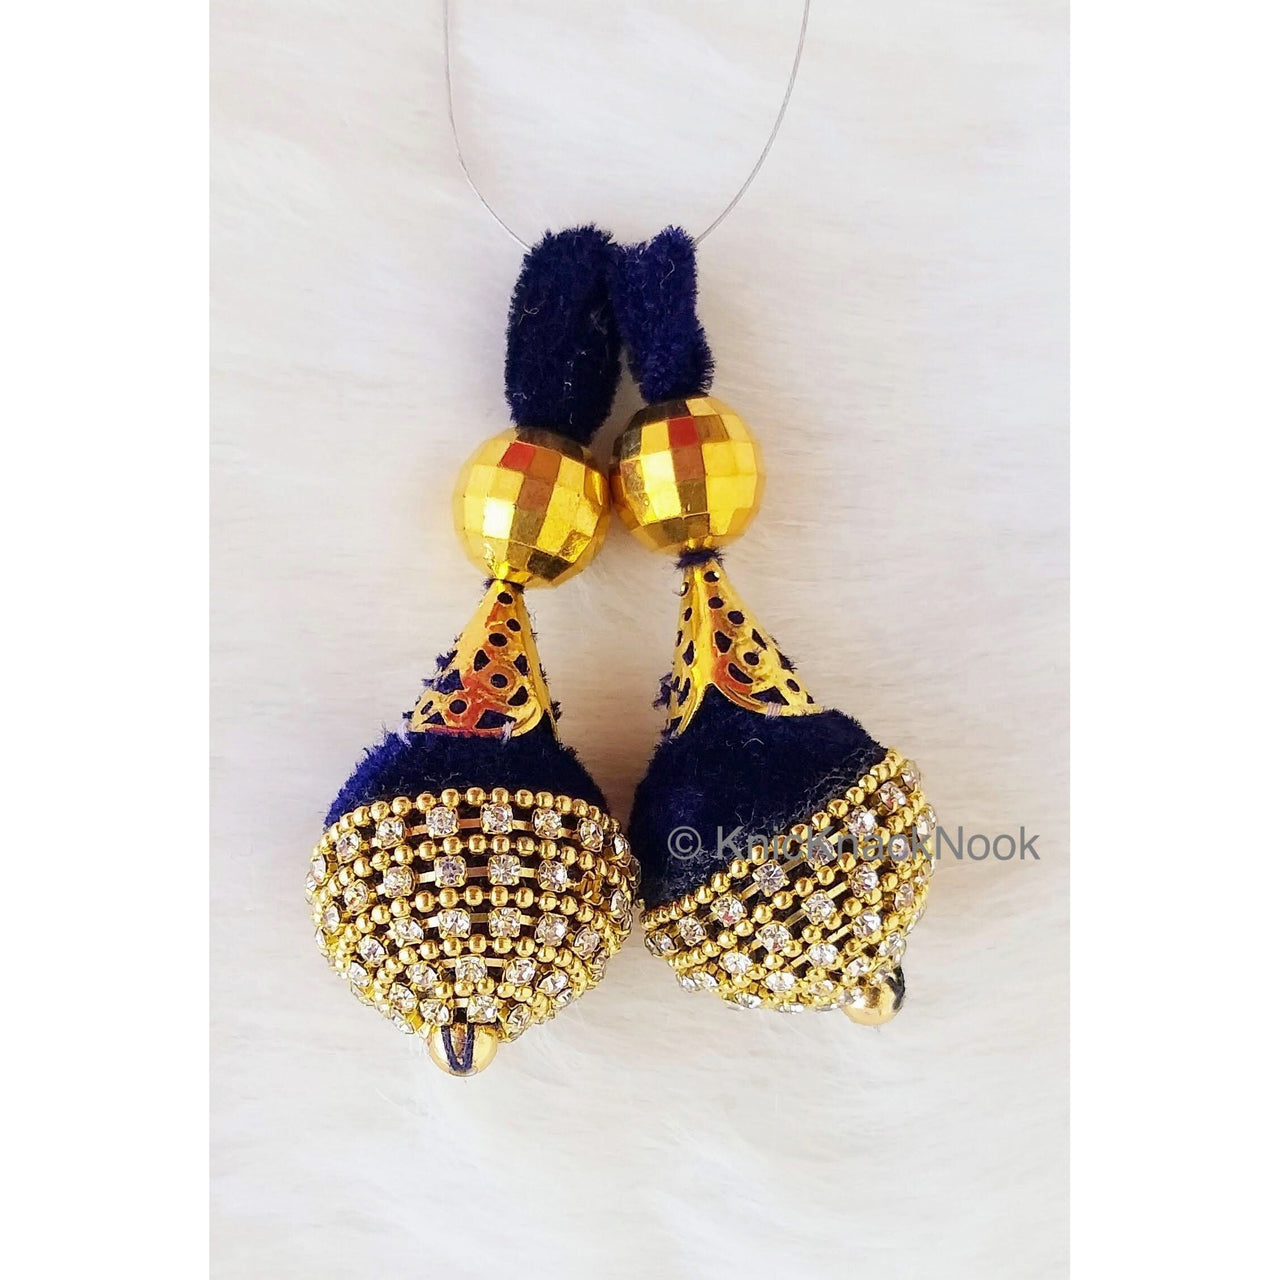 Violet Ball Shaped Velvet Fabric Latkan With Gold Beads and Diamante, Indian Embellishment, Wedding Tassels